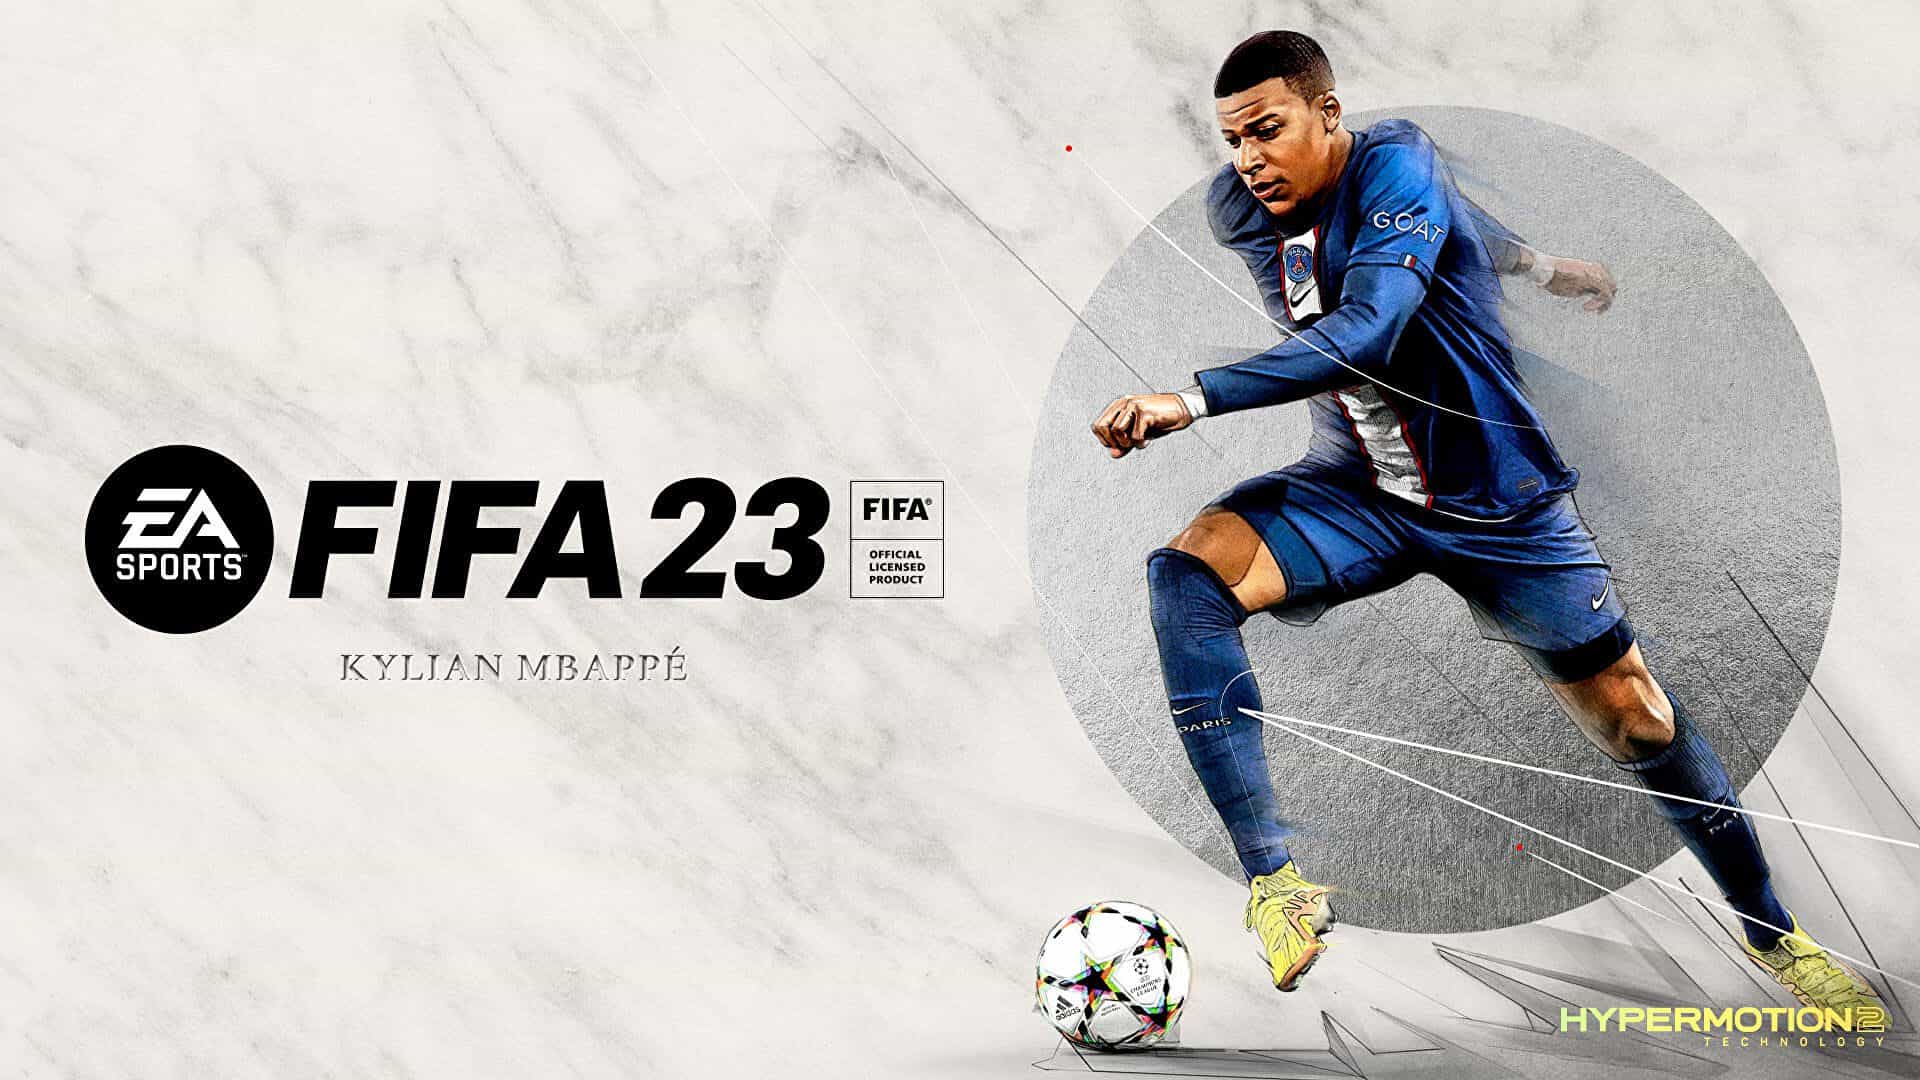 FIFA 23 game poster